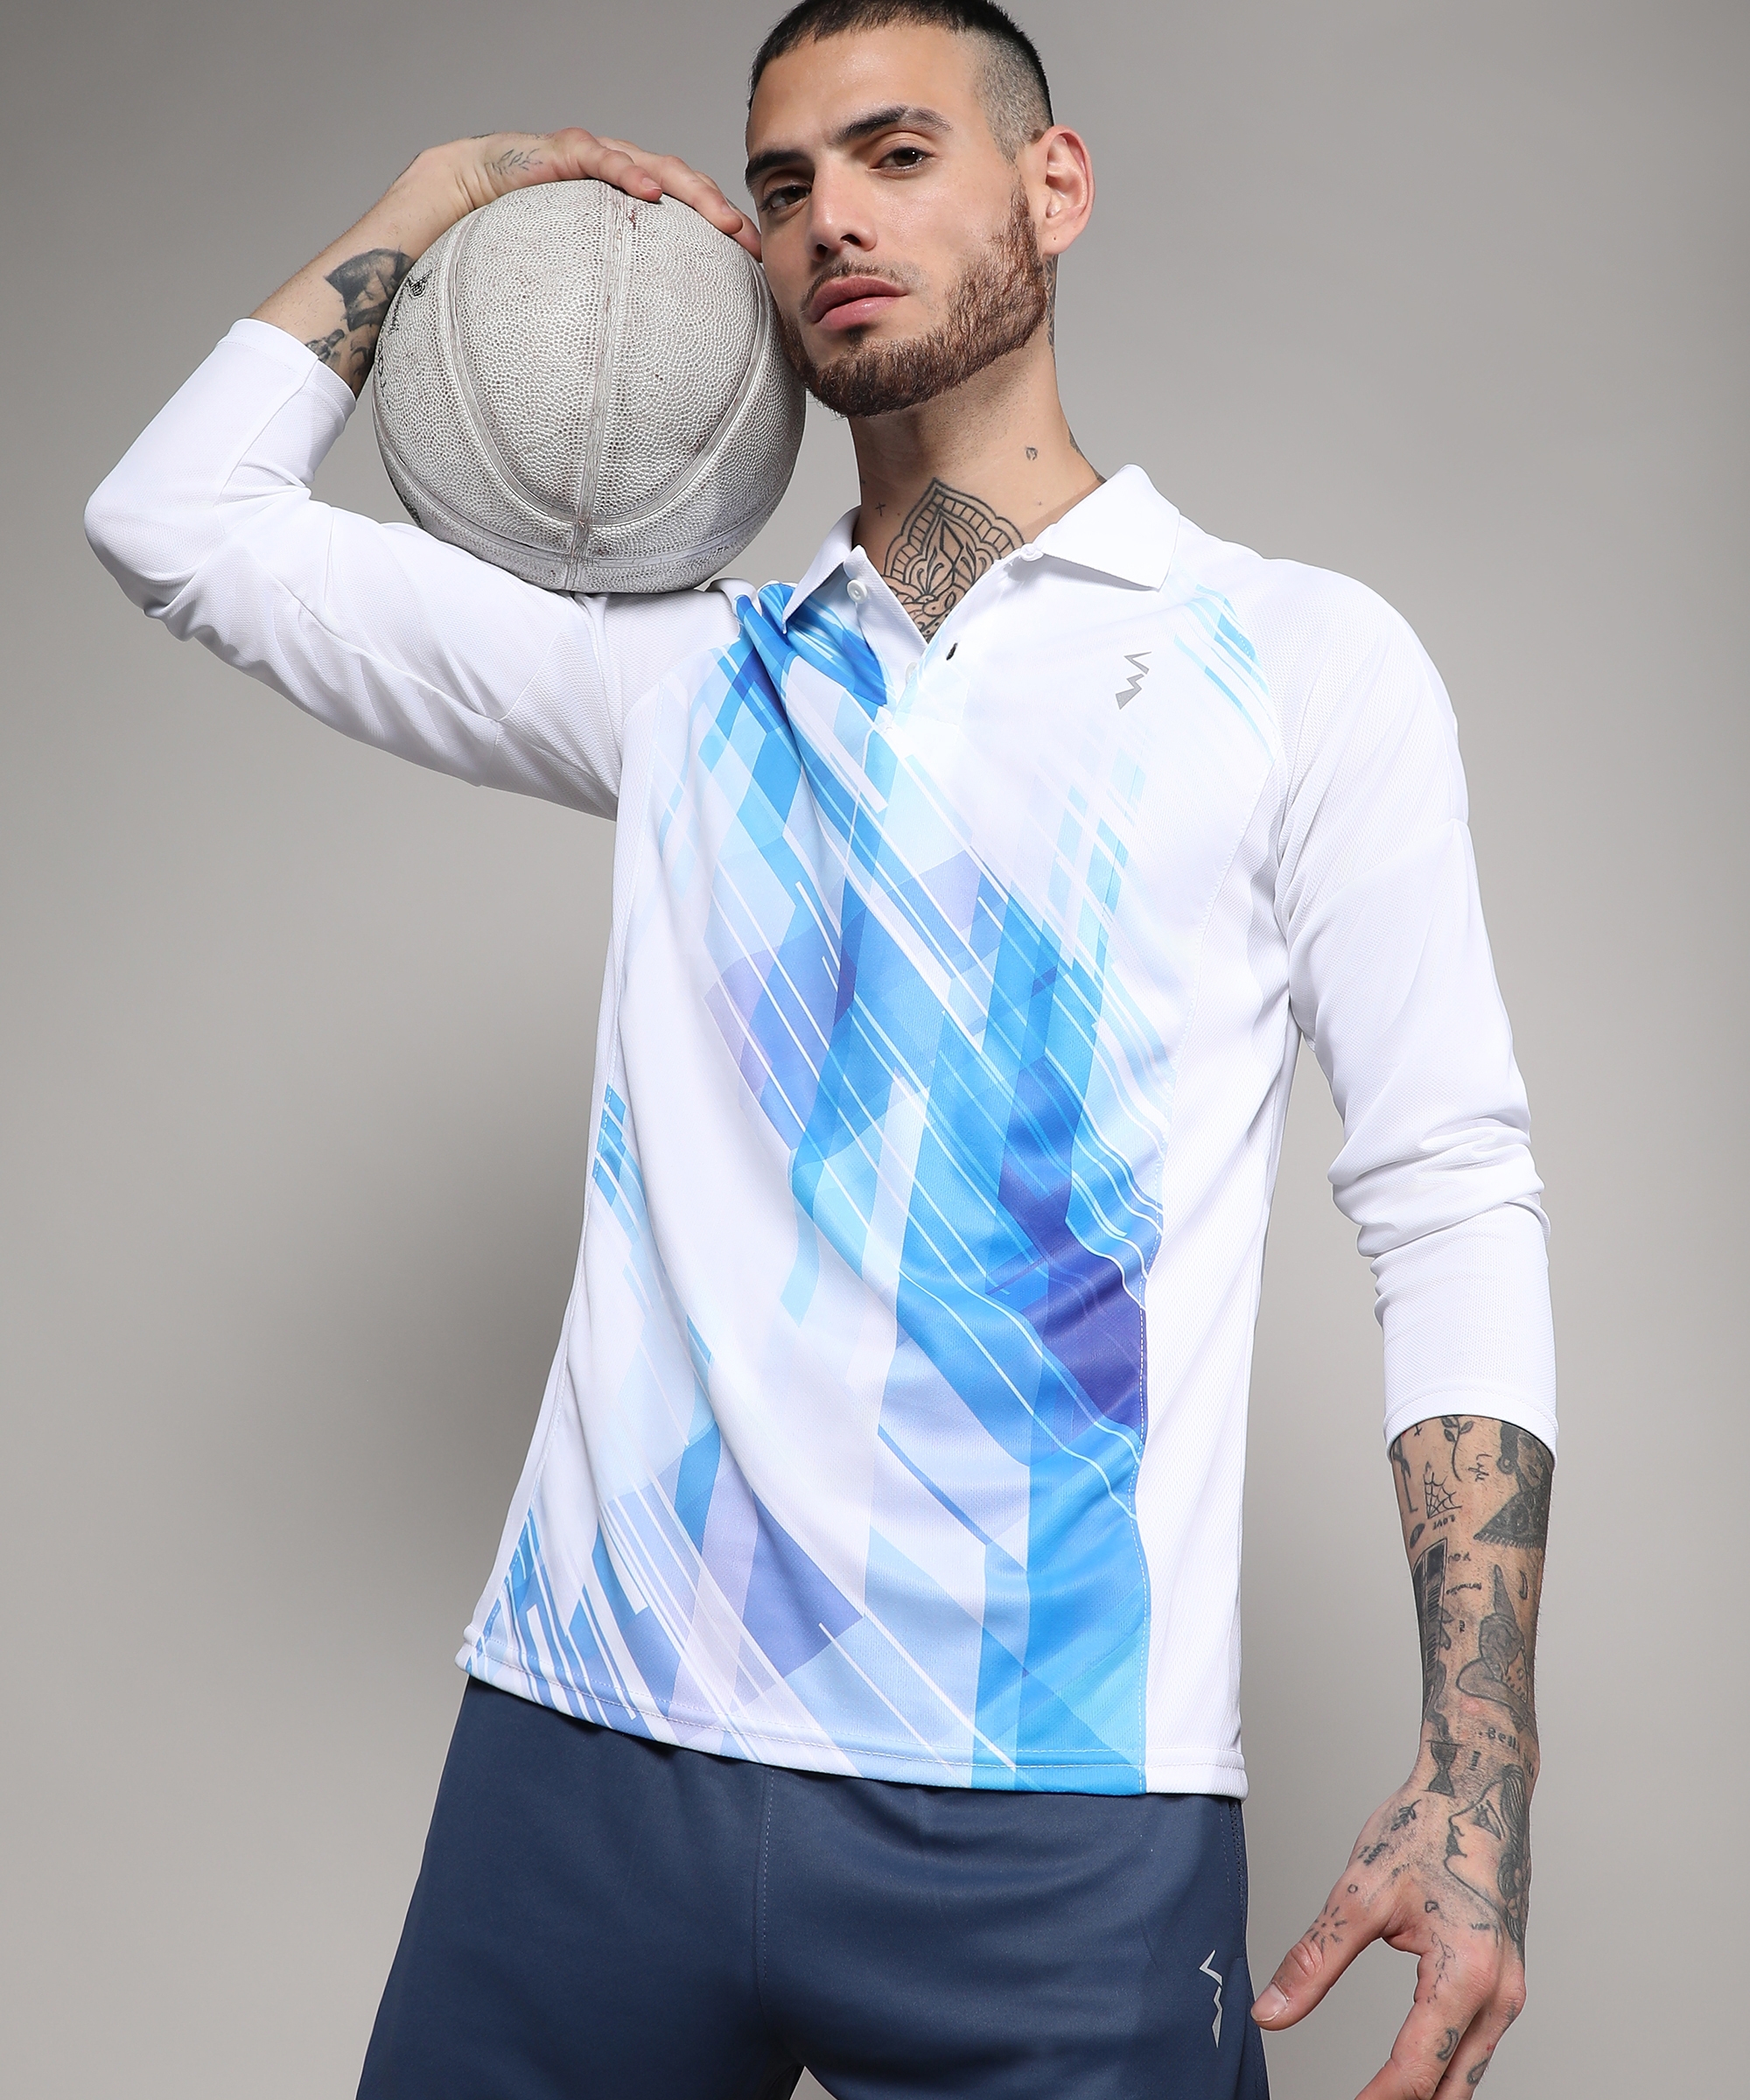 CAMPUS SUTRA | Men's White and Blue Printed Activewear T-Shirt